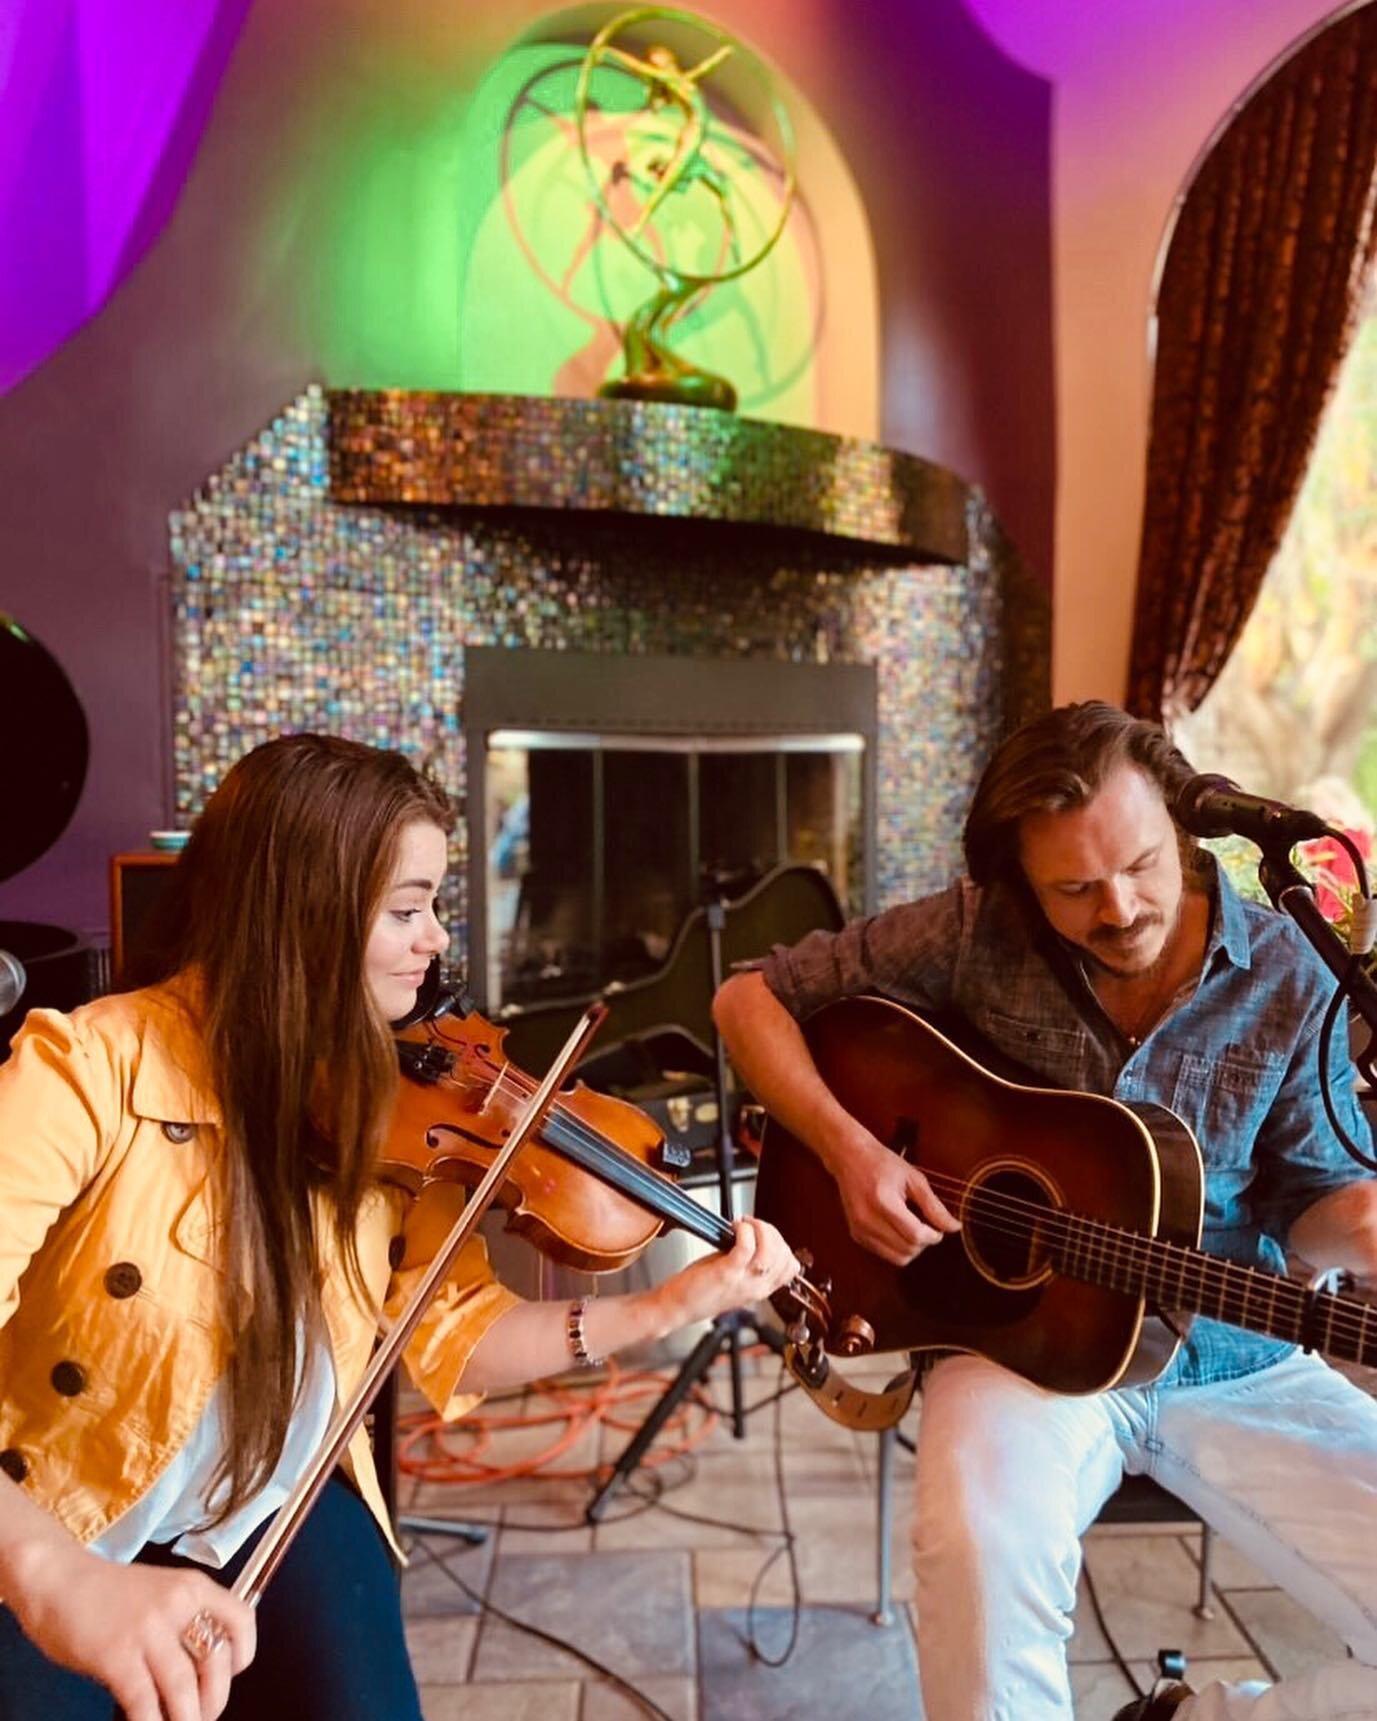 We had a blast playing music and reconnecting with lots of friends on the road this past week! Big thanks to all the folks who came to hang out with us at some of our first shows back! 
.
.
.
.
.
#livemusic #ontheroadagain #americanamusic #folkmusic 